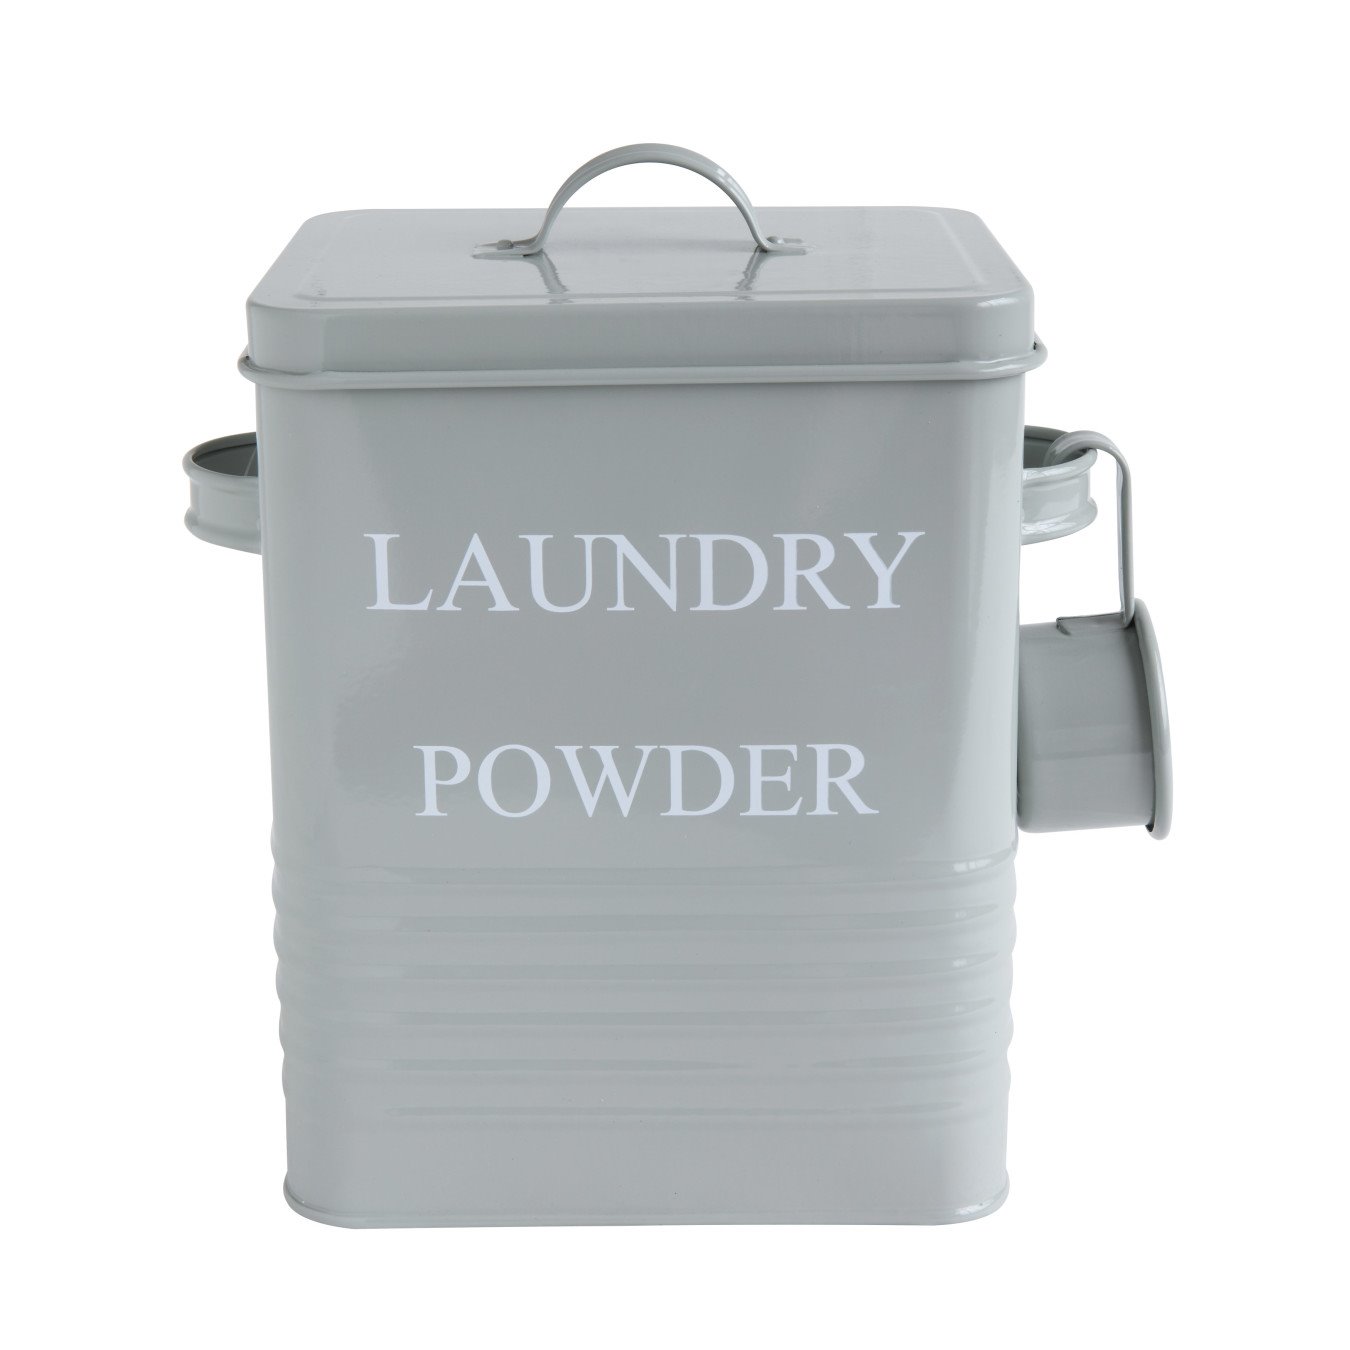 "Laundry Powder" 3 Piece Grey Metal Container with Lid & Scoop